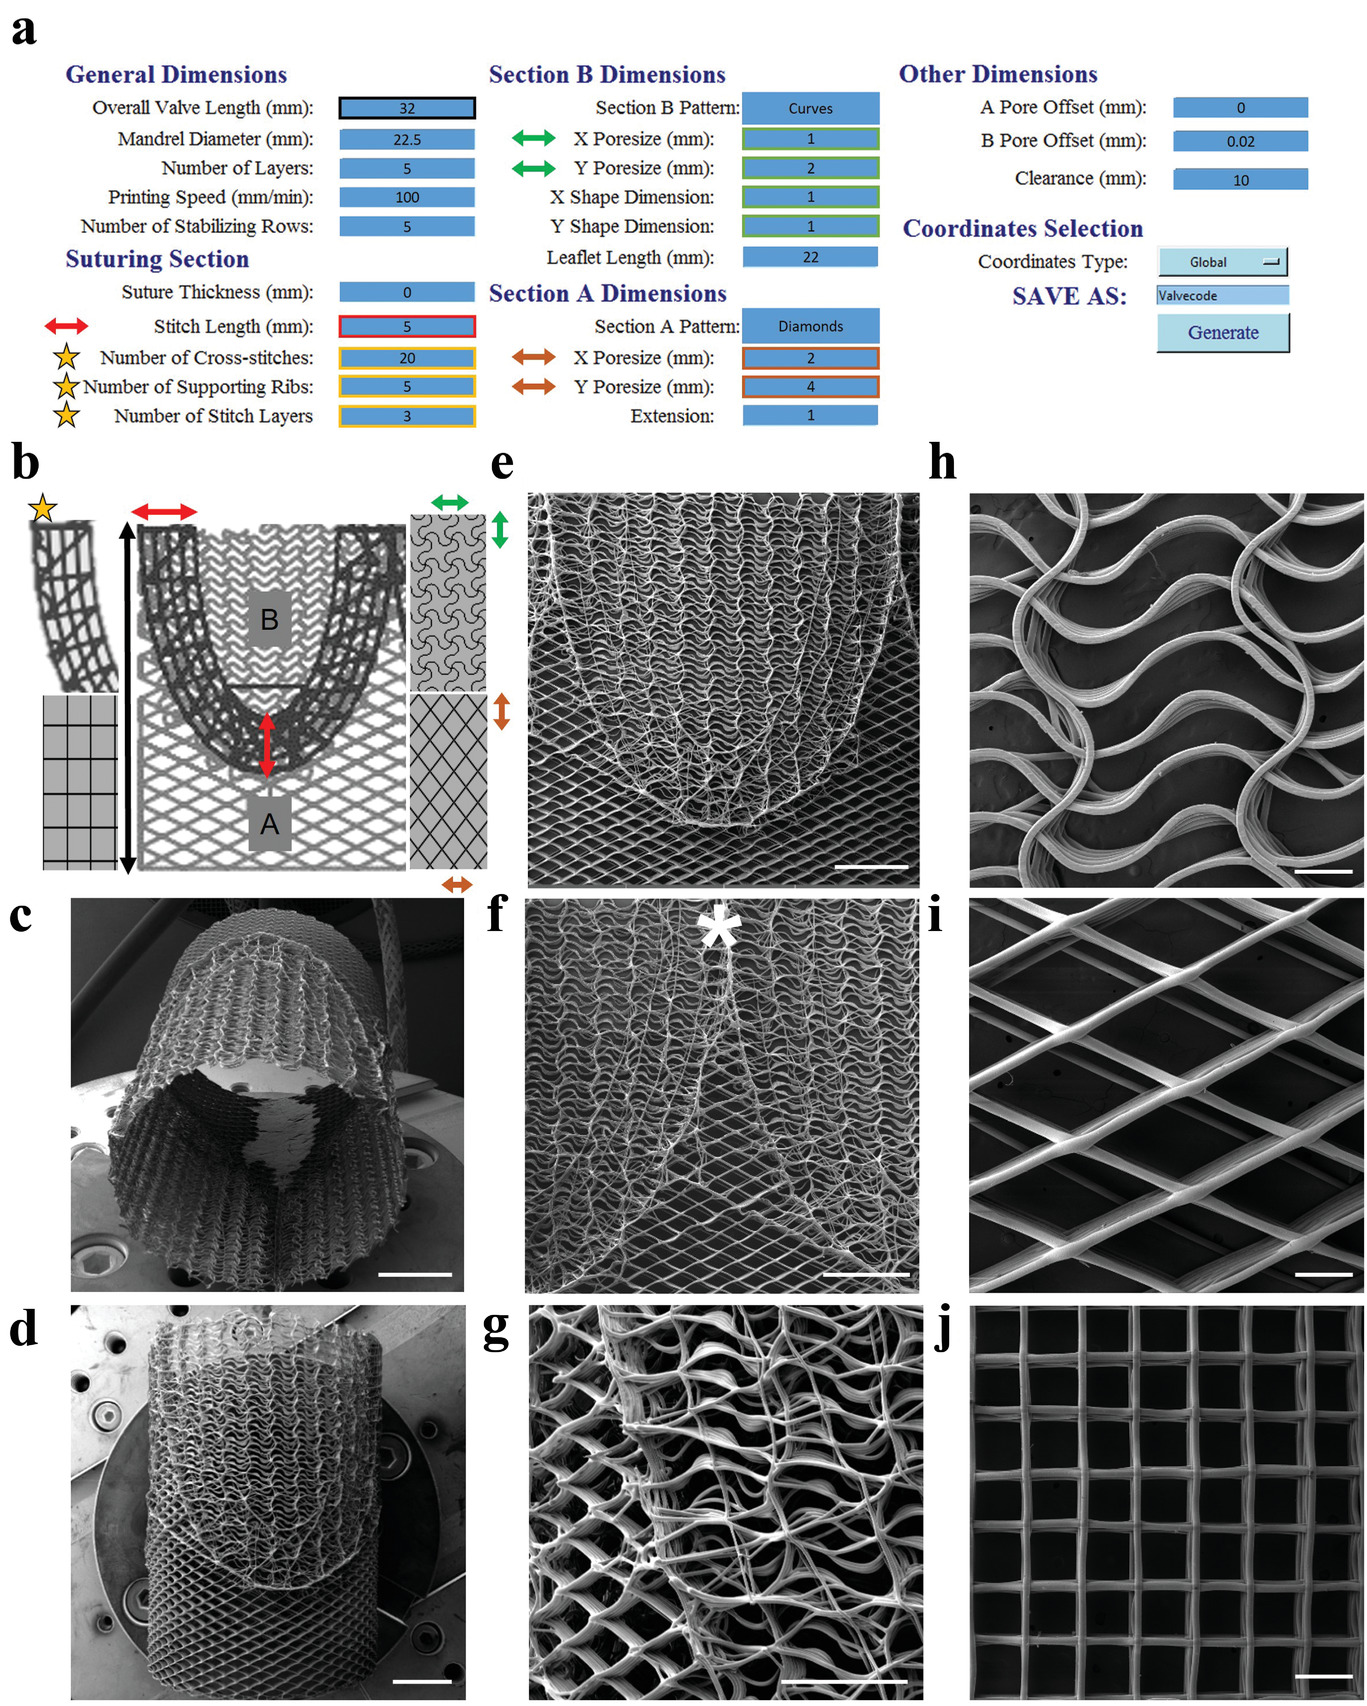 Design and fabrication of tubular, spatially heterogeneous scaffolds for heart valve tissue engineering. Image via Advanced Functional Materials.